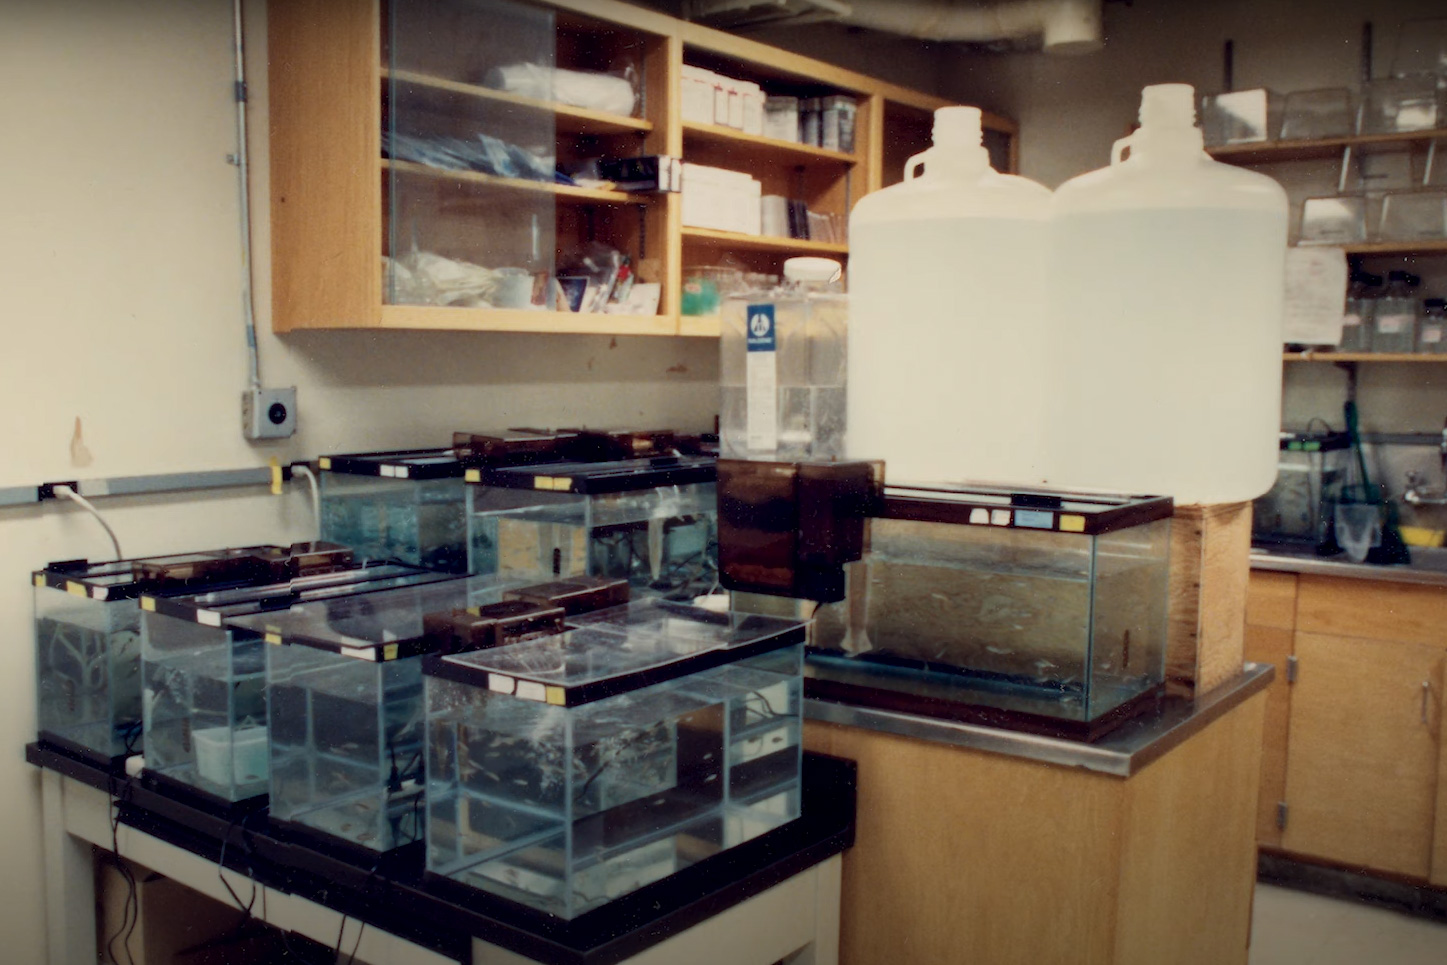 A view of the Hopkins lab space showing fish tanks on every surface.